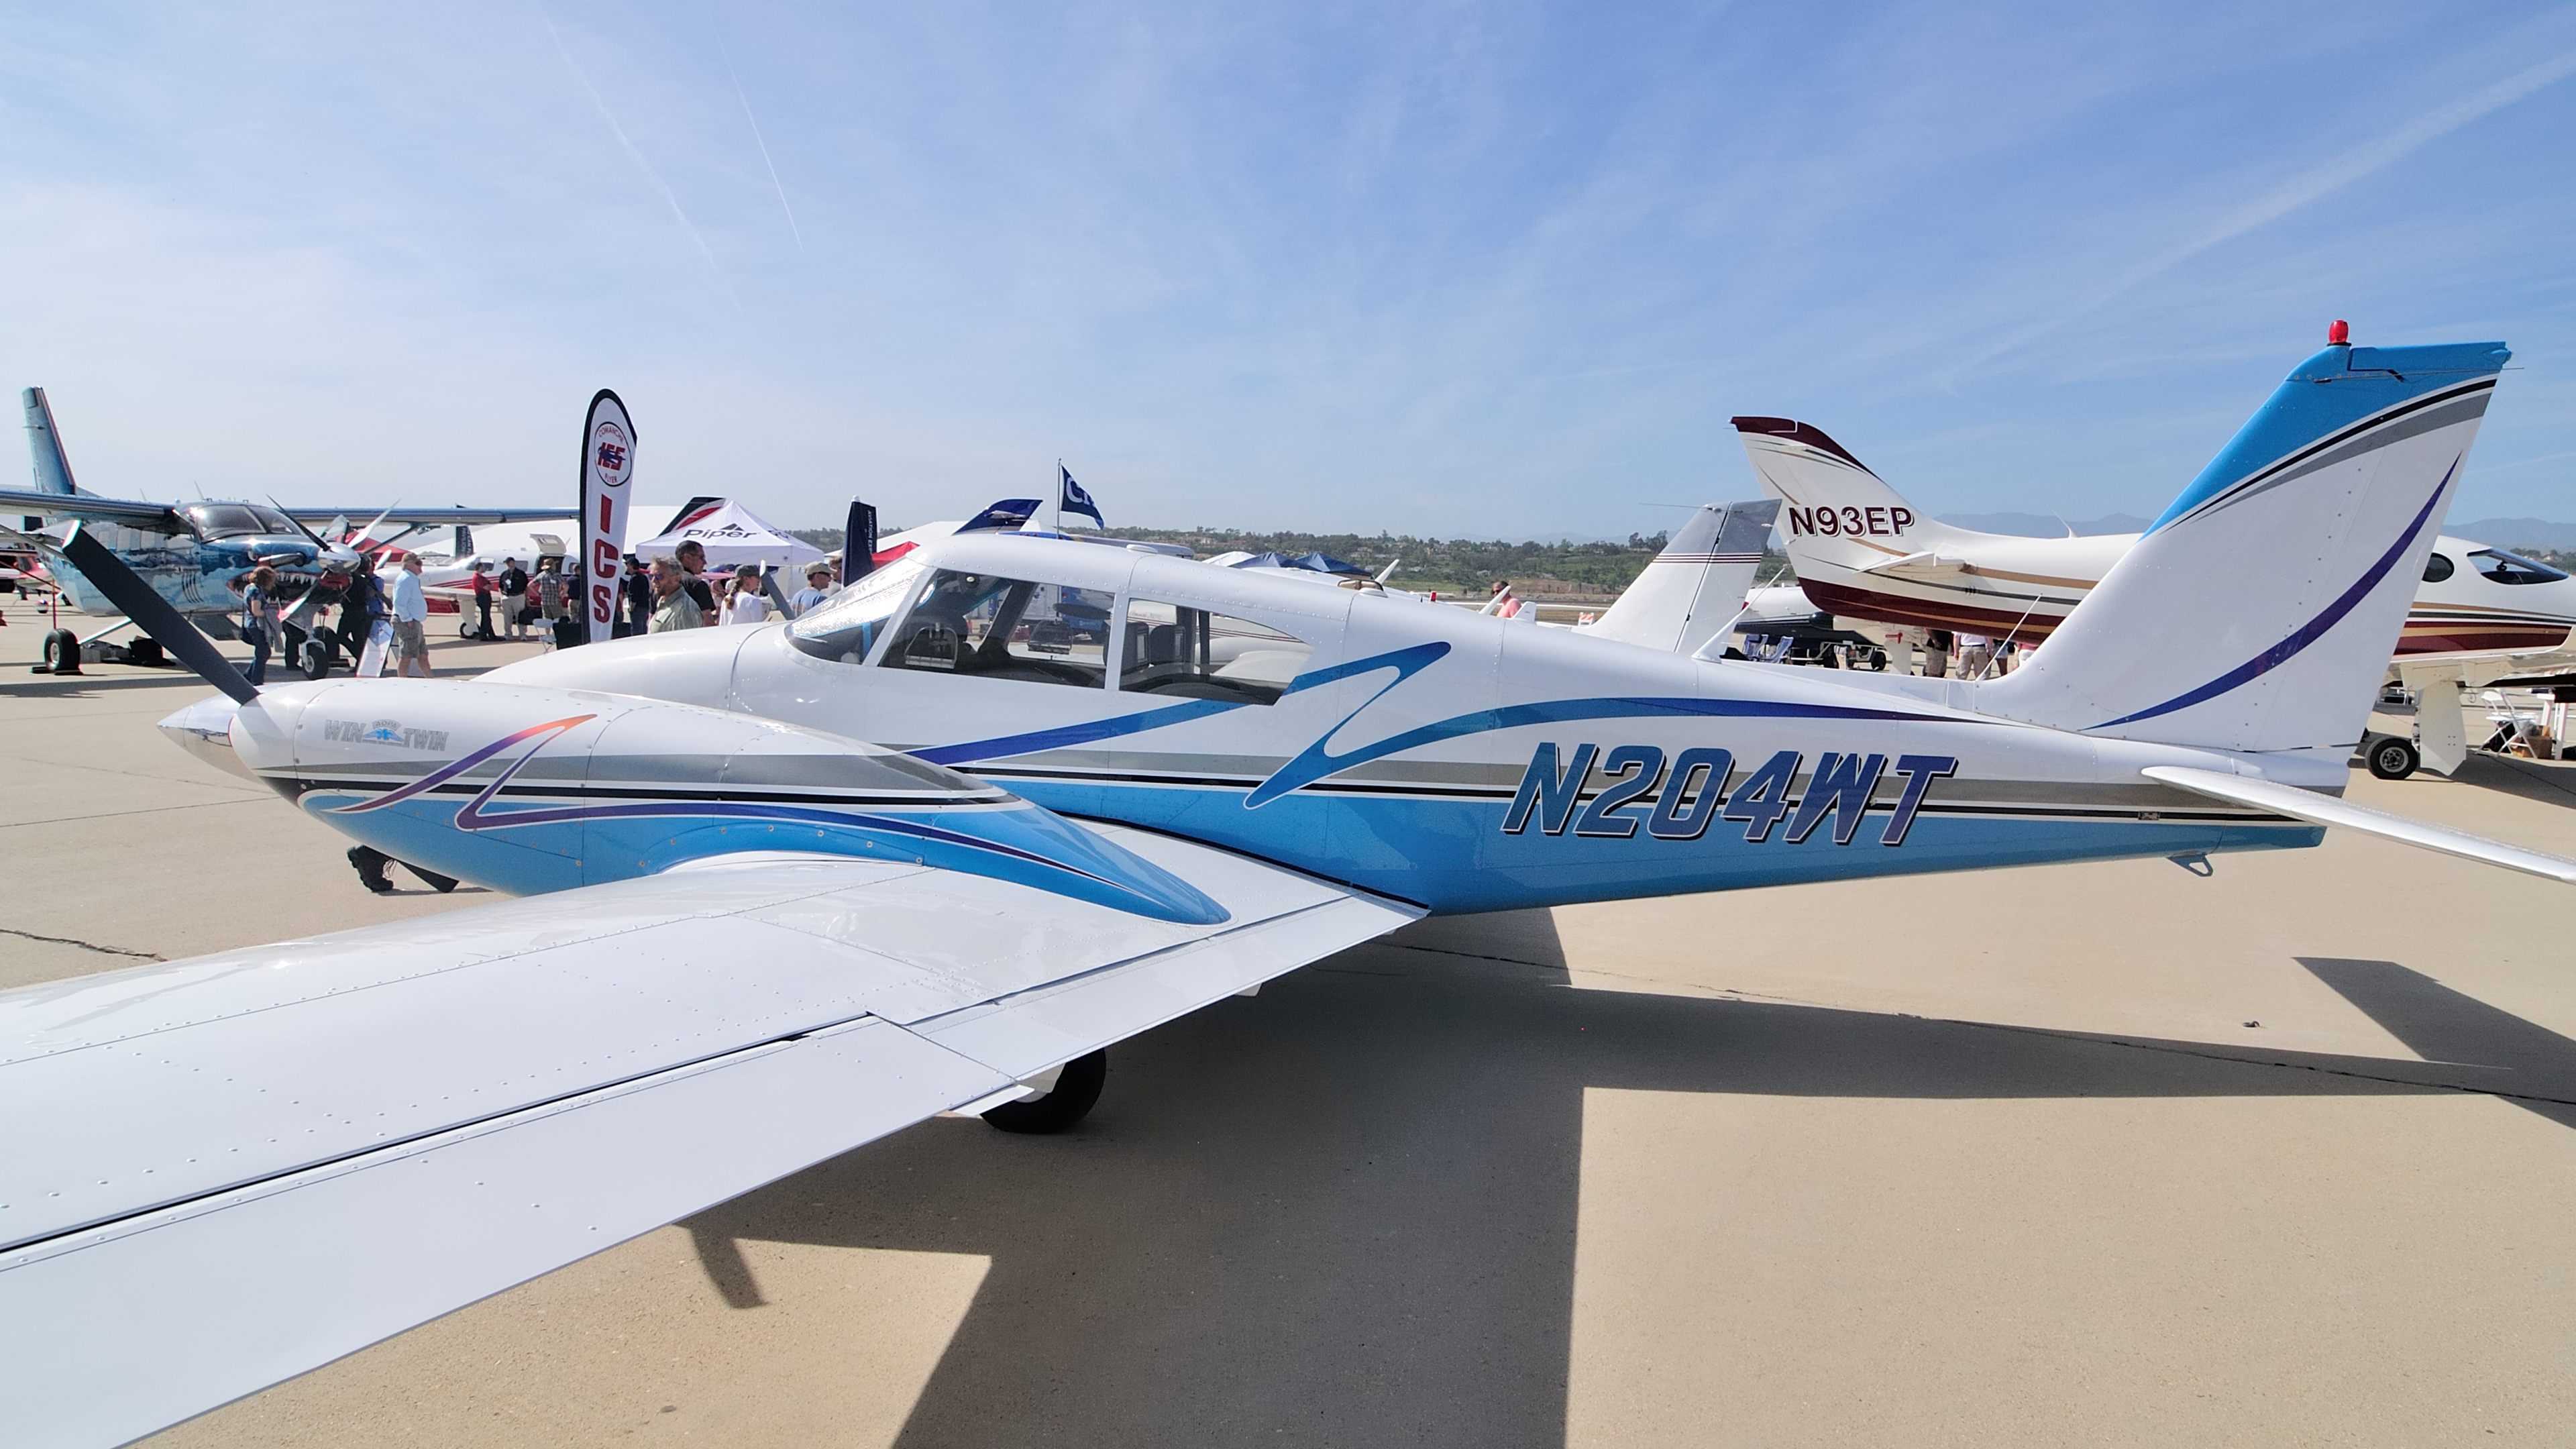 A familiar face at the Camarillo Fly-In is AOPA's 2004 Win a Twin Sweepstakes Piper Twin Comanche. It represented the International Comanche Society in the aircraft static display. Photo by Mike Collins.